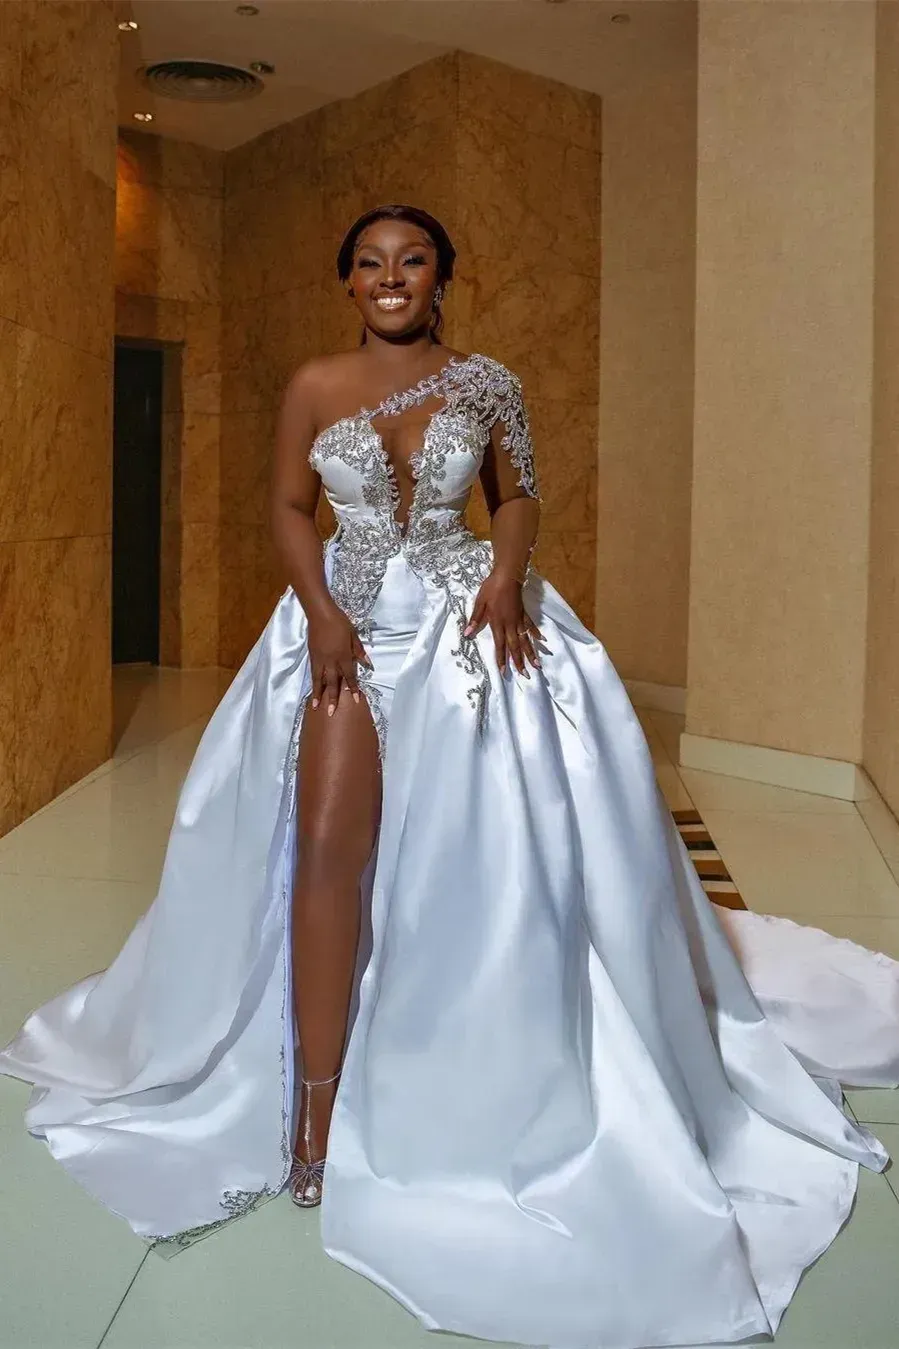 ASO EBI African Sexy High Split Wedding Dresses A Line One Shoulder Beaded Appliques Keyhole Neck Slit Bridal Gowns Plus Size Robes BC14877